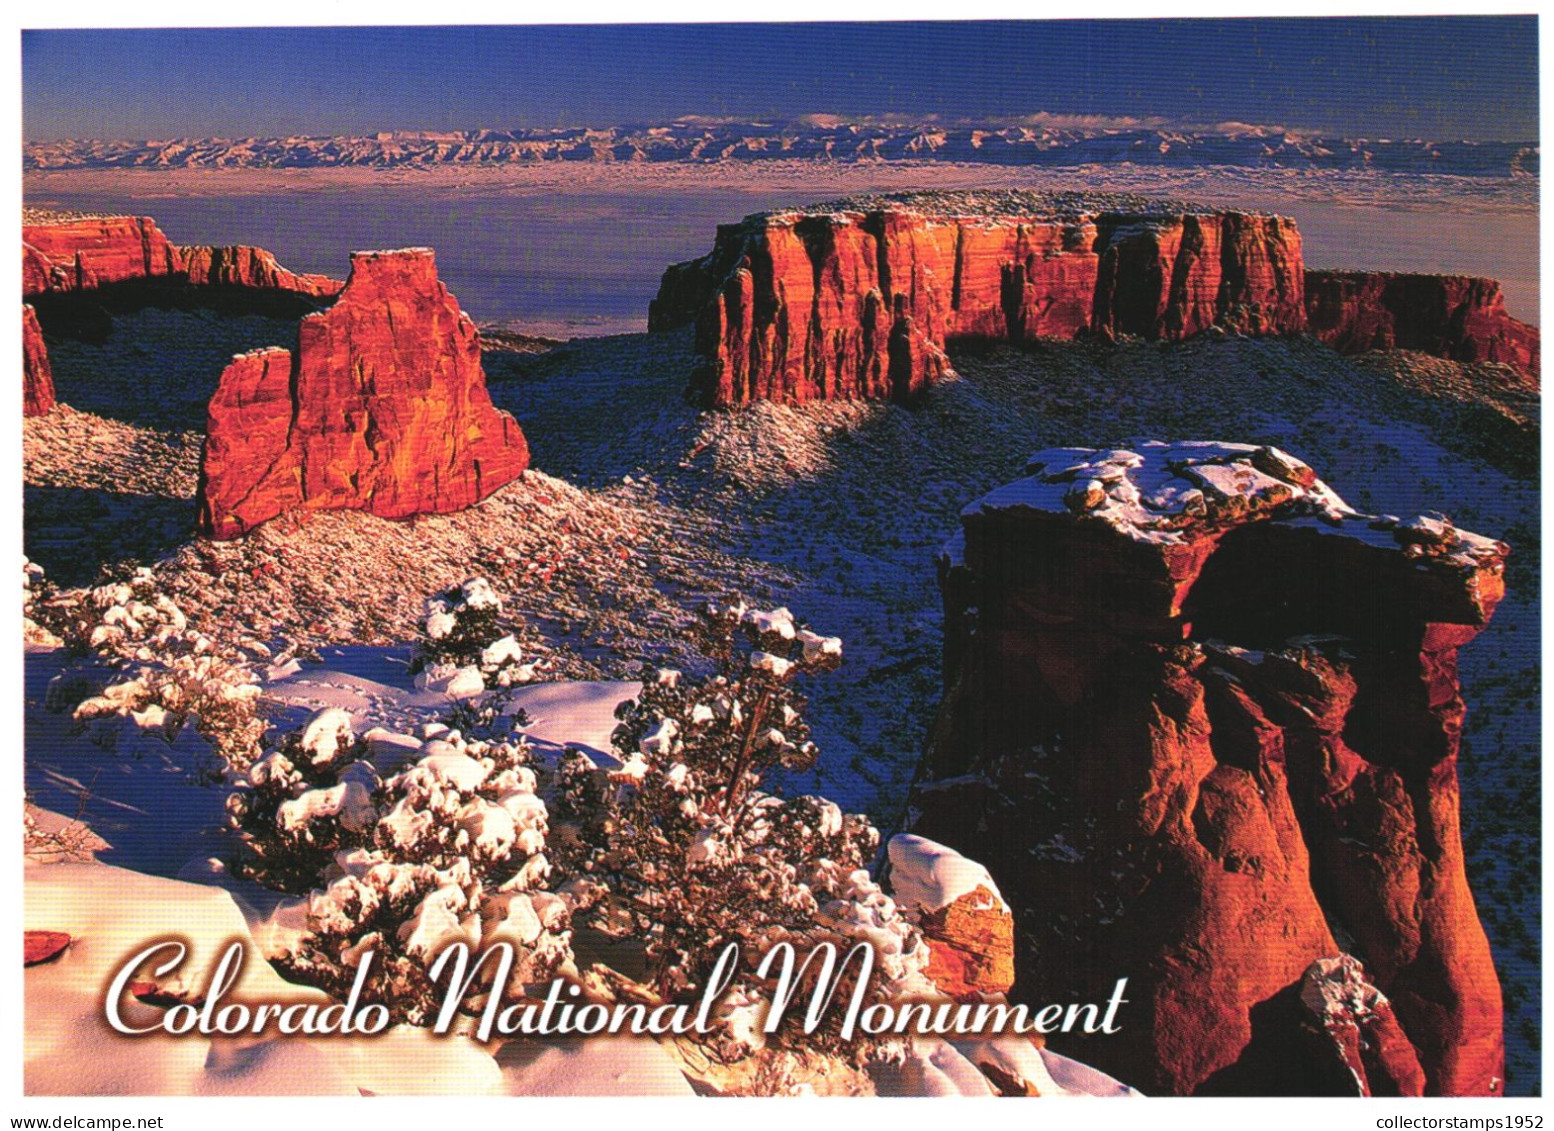 DENVER, COLORADO, NATIONAL MONUMENT, WINTER IN MONUMENT CANYON, UNITED STATES - Denver